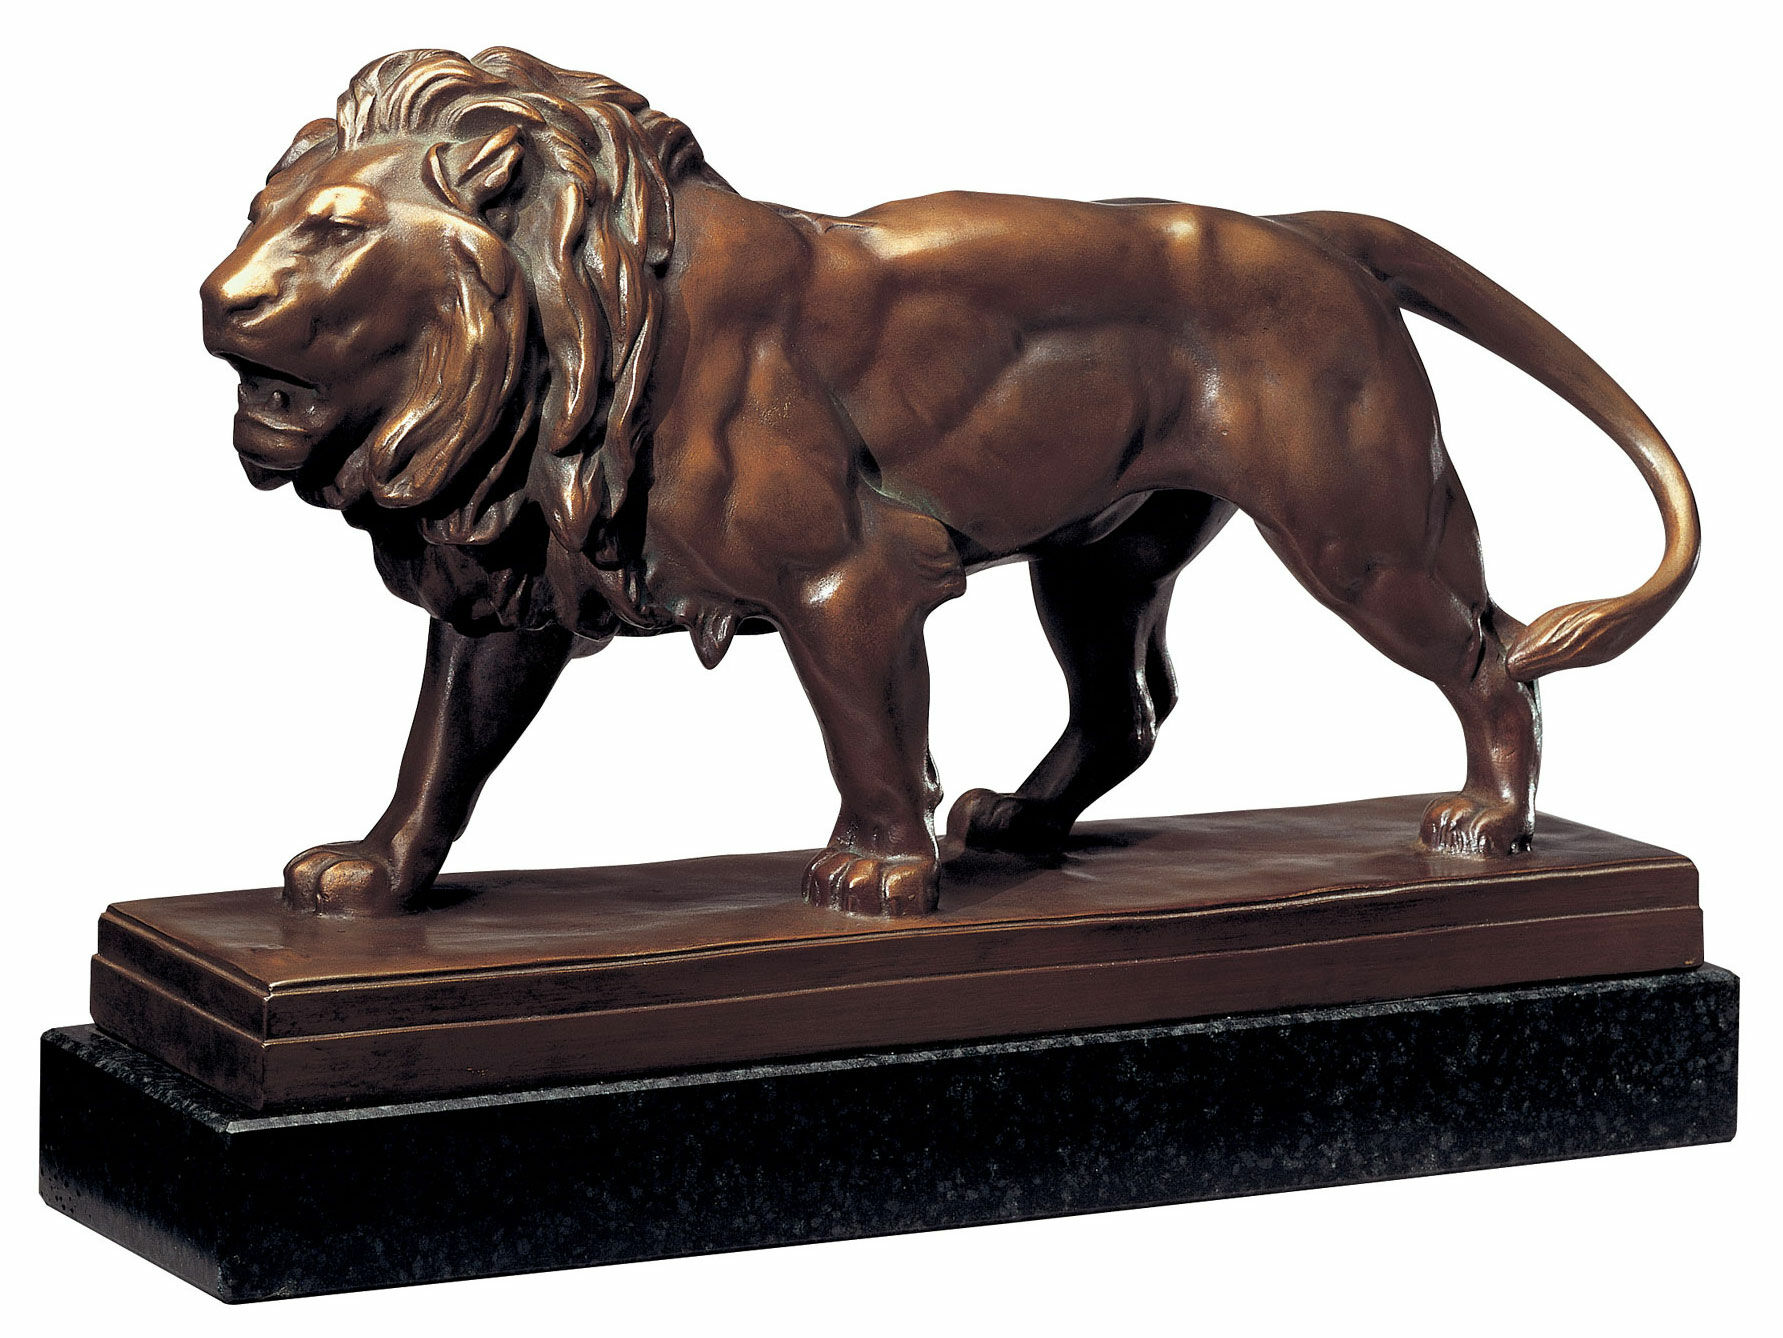 Sculpture "Attacking Lion", bonded bronze by Antoine-Louis Barye